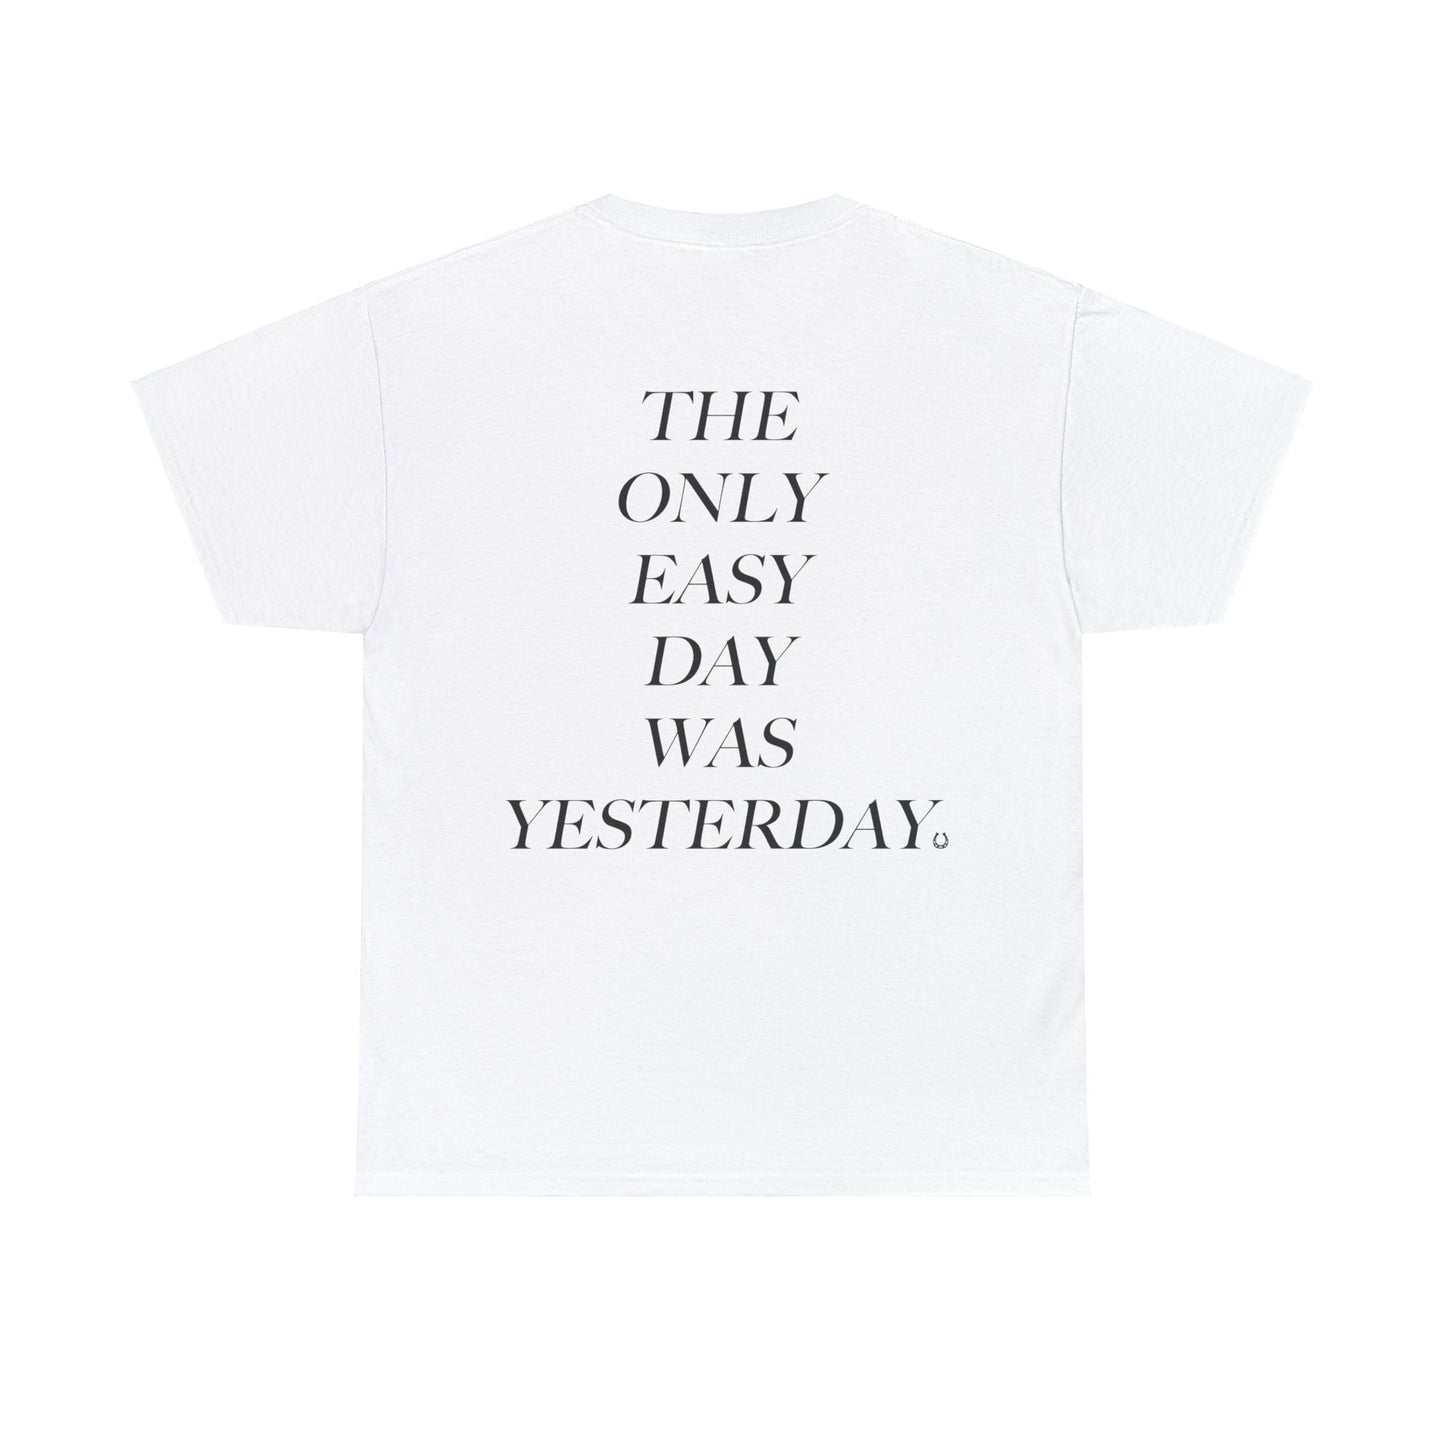 Sydney Sisil: The Only Easy Day Was Yesterday Tee